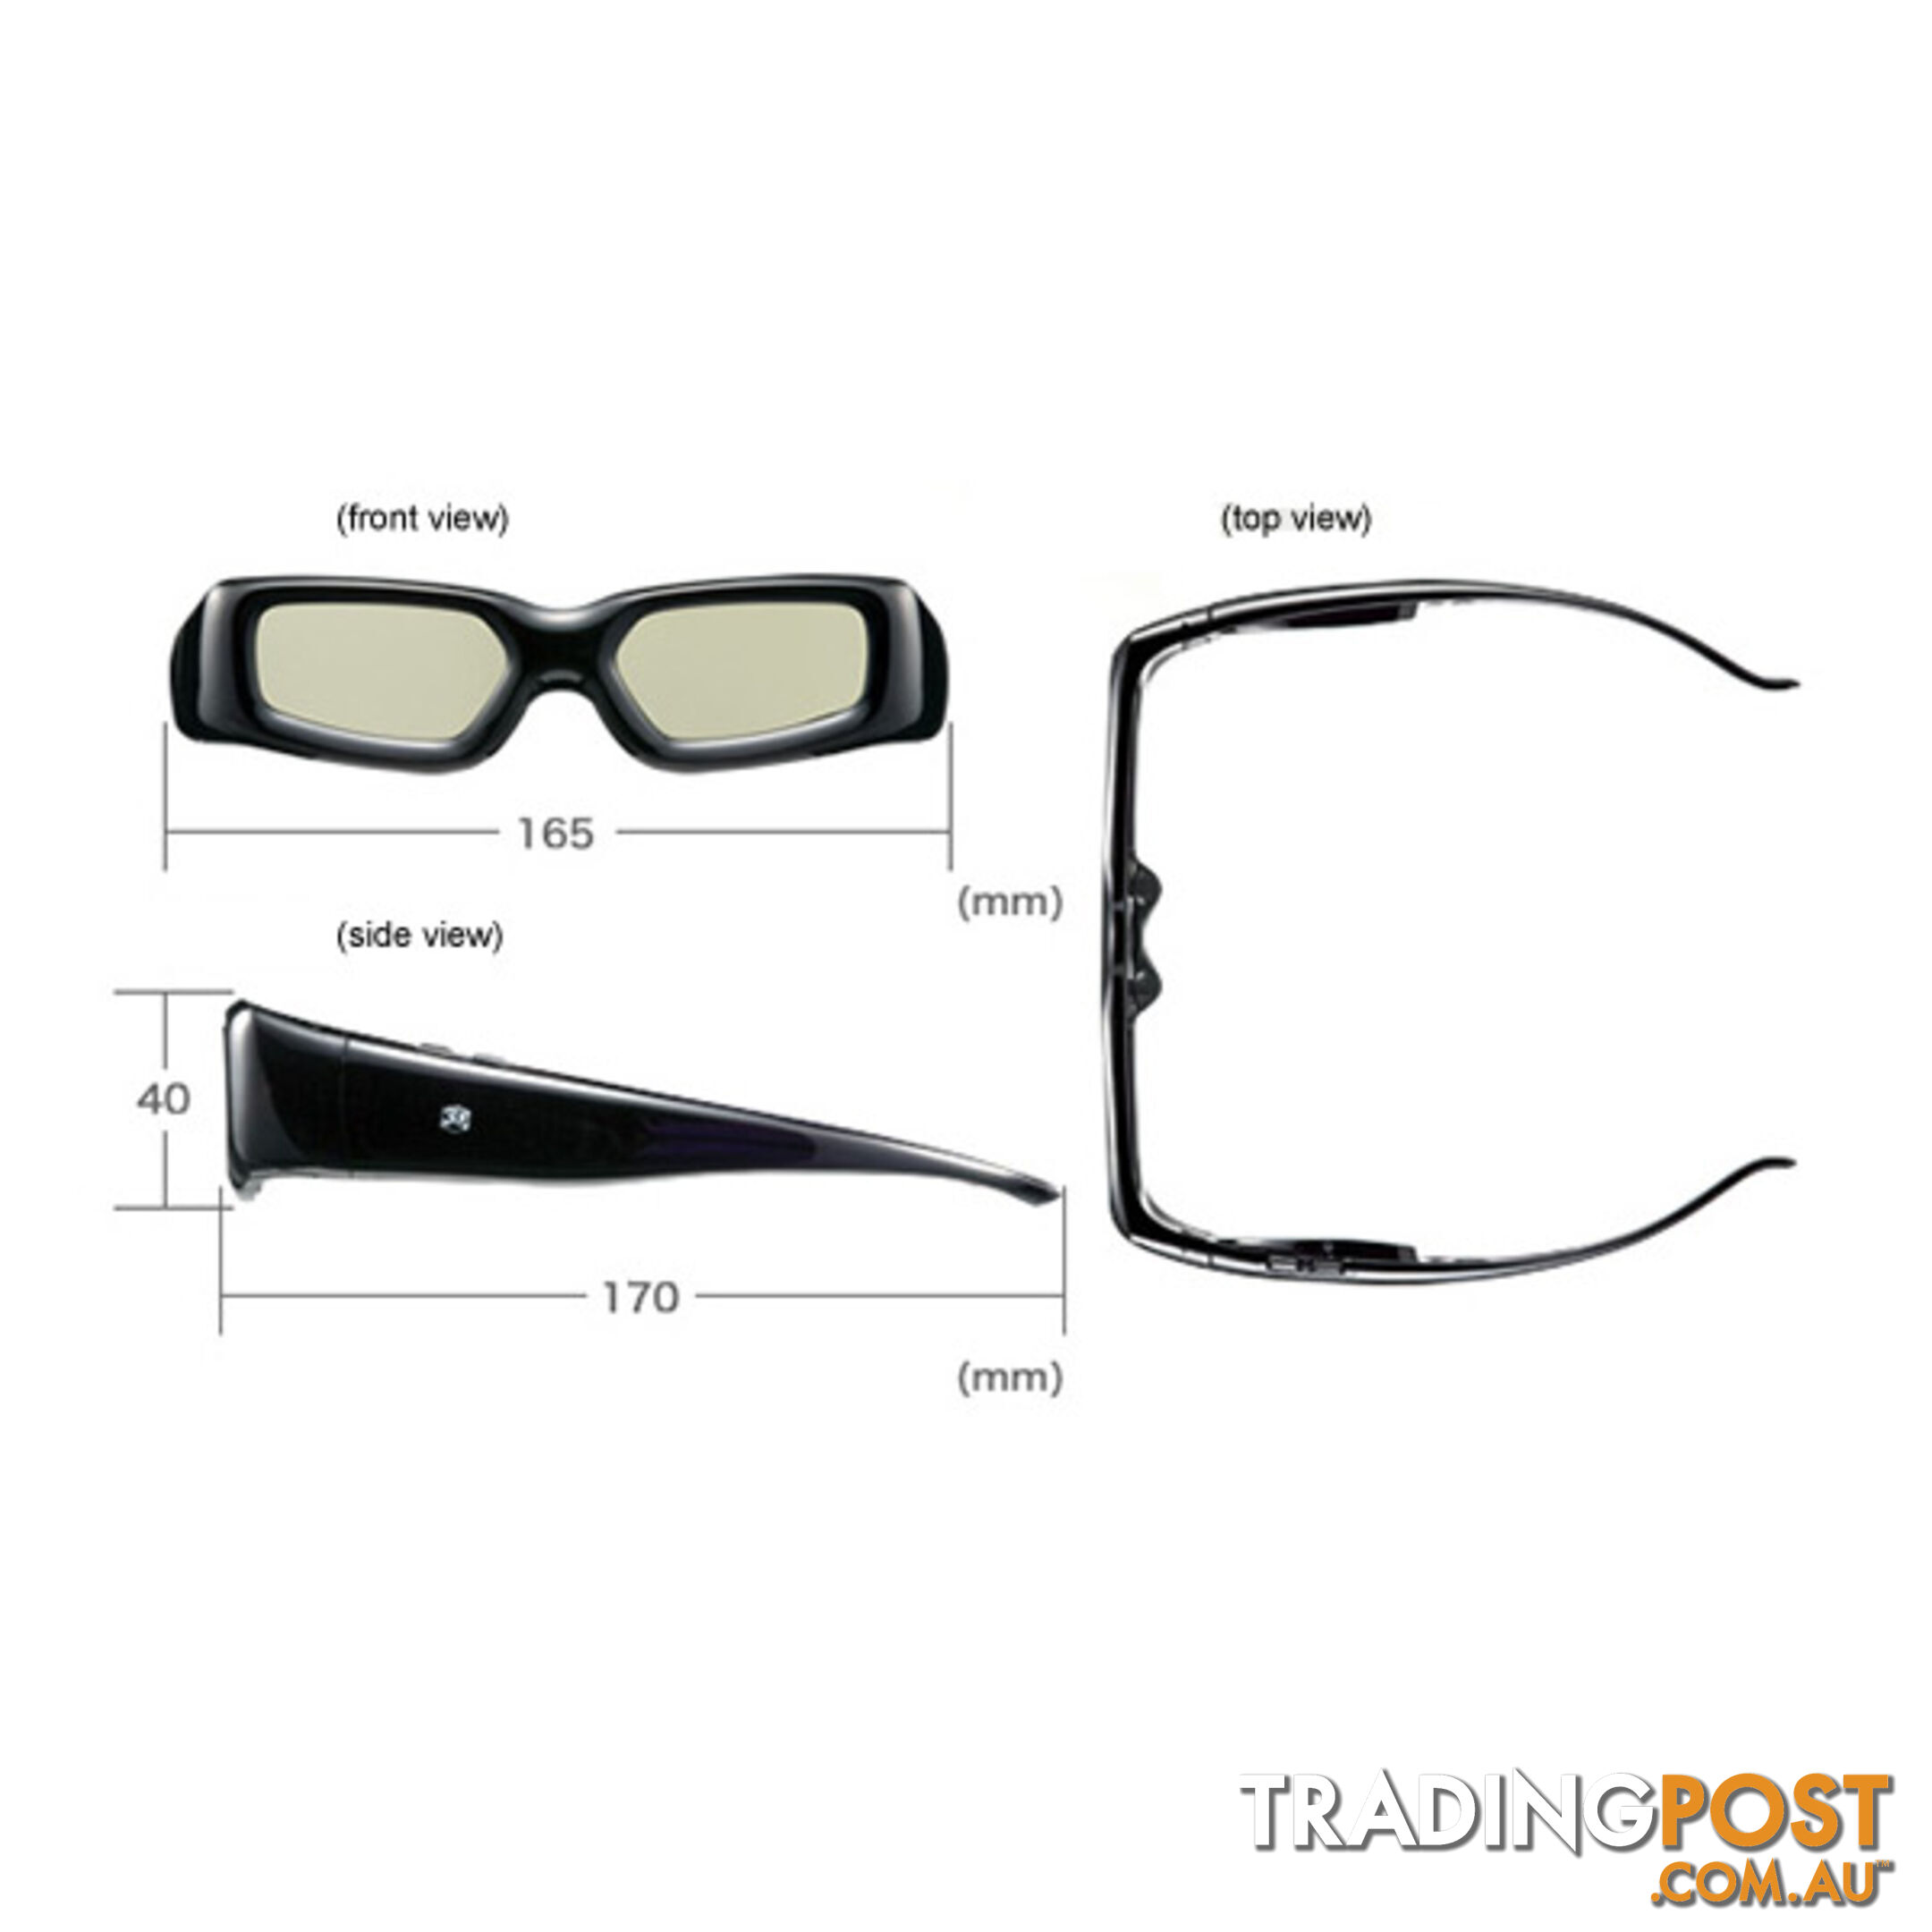 3D Active Glasses (Universal) for All Competitive 3D TV with IR Technology